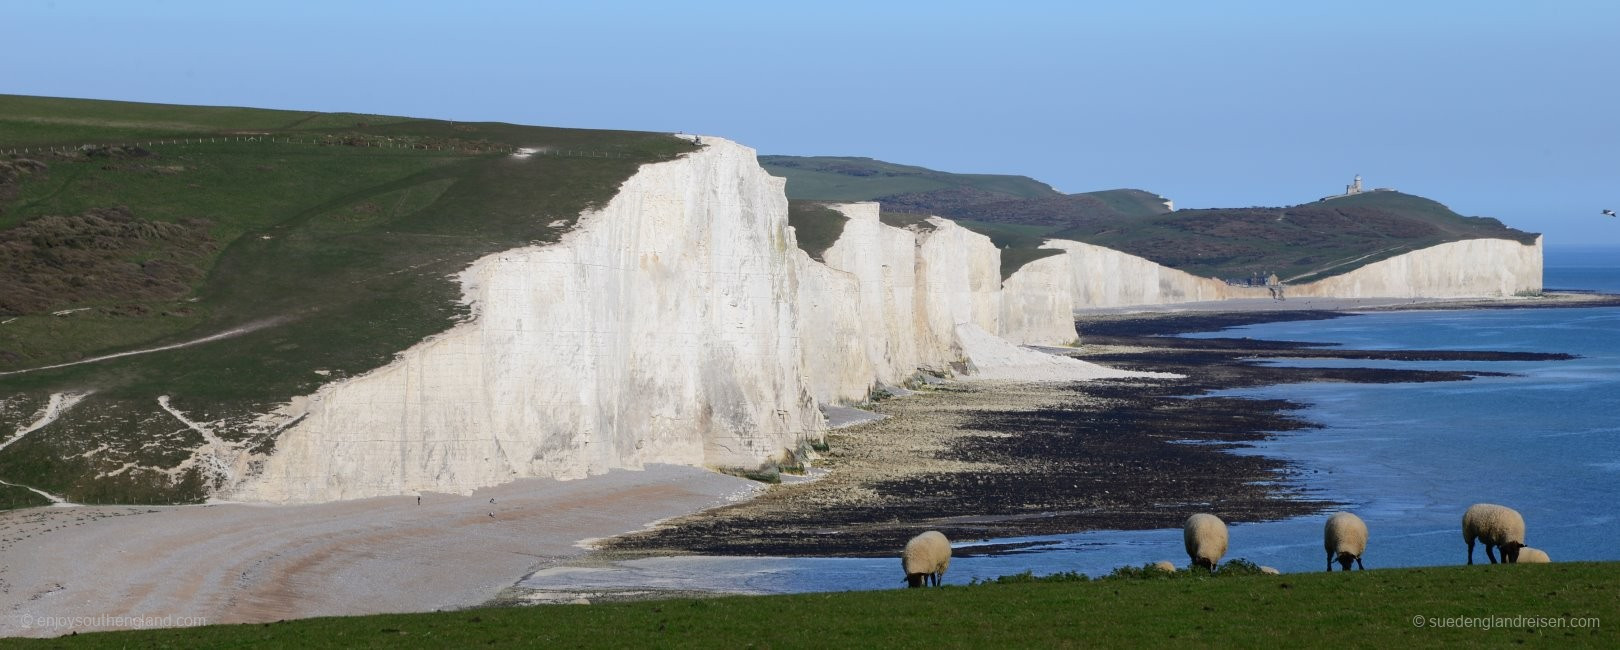 The white chalk cliffs of the Seven Sisters